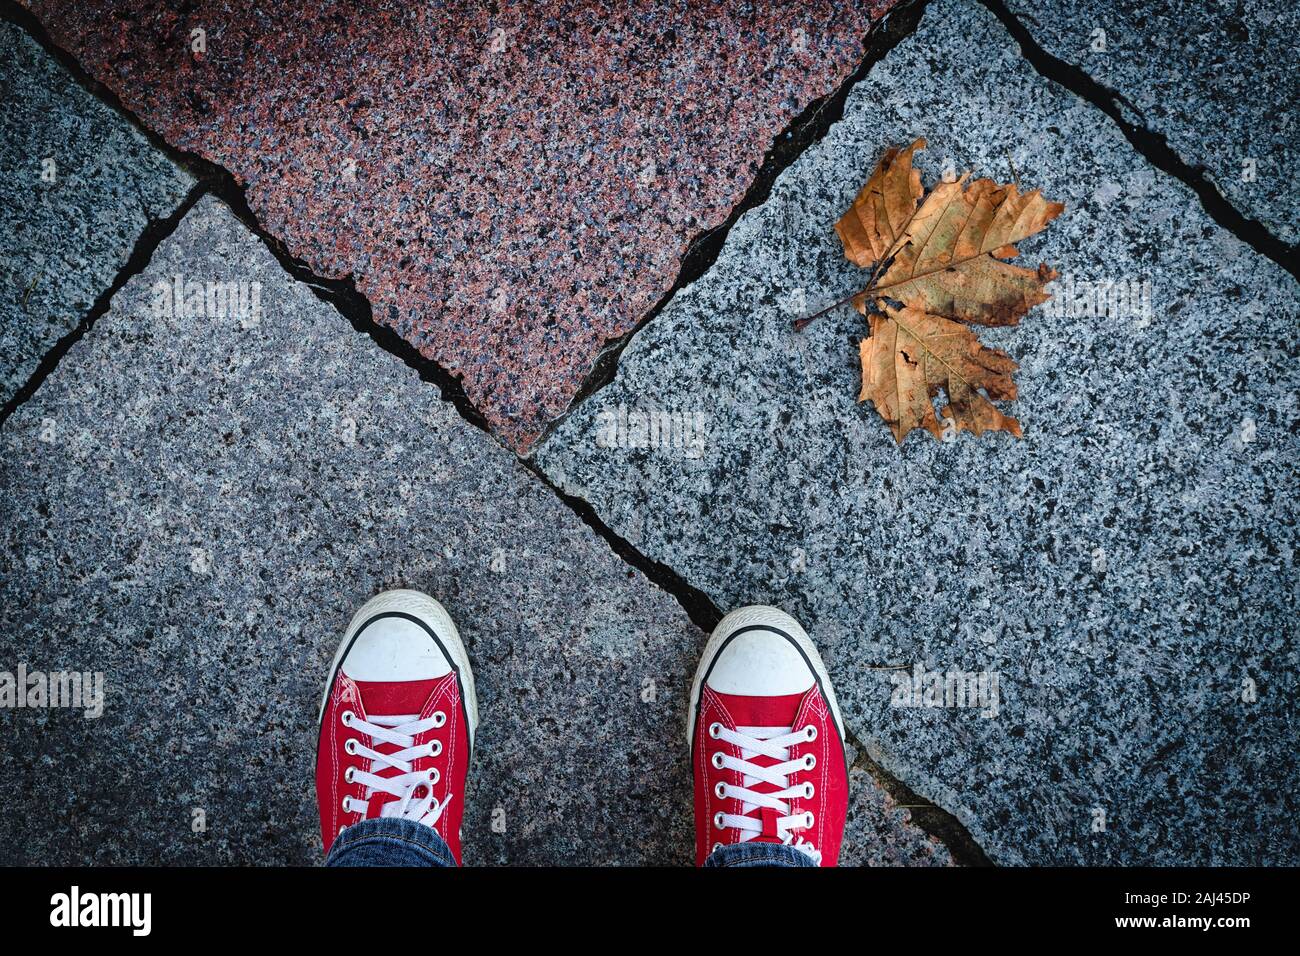 Looking down at my red shoes and a lone leaf on the sidewalk. Stock Photo